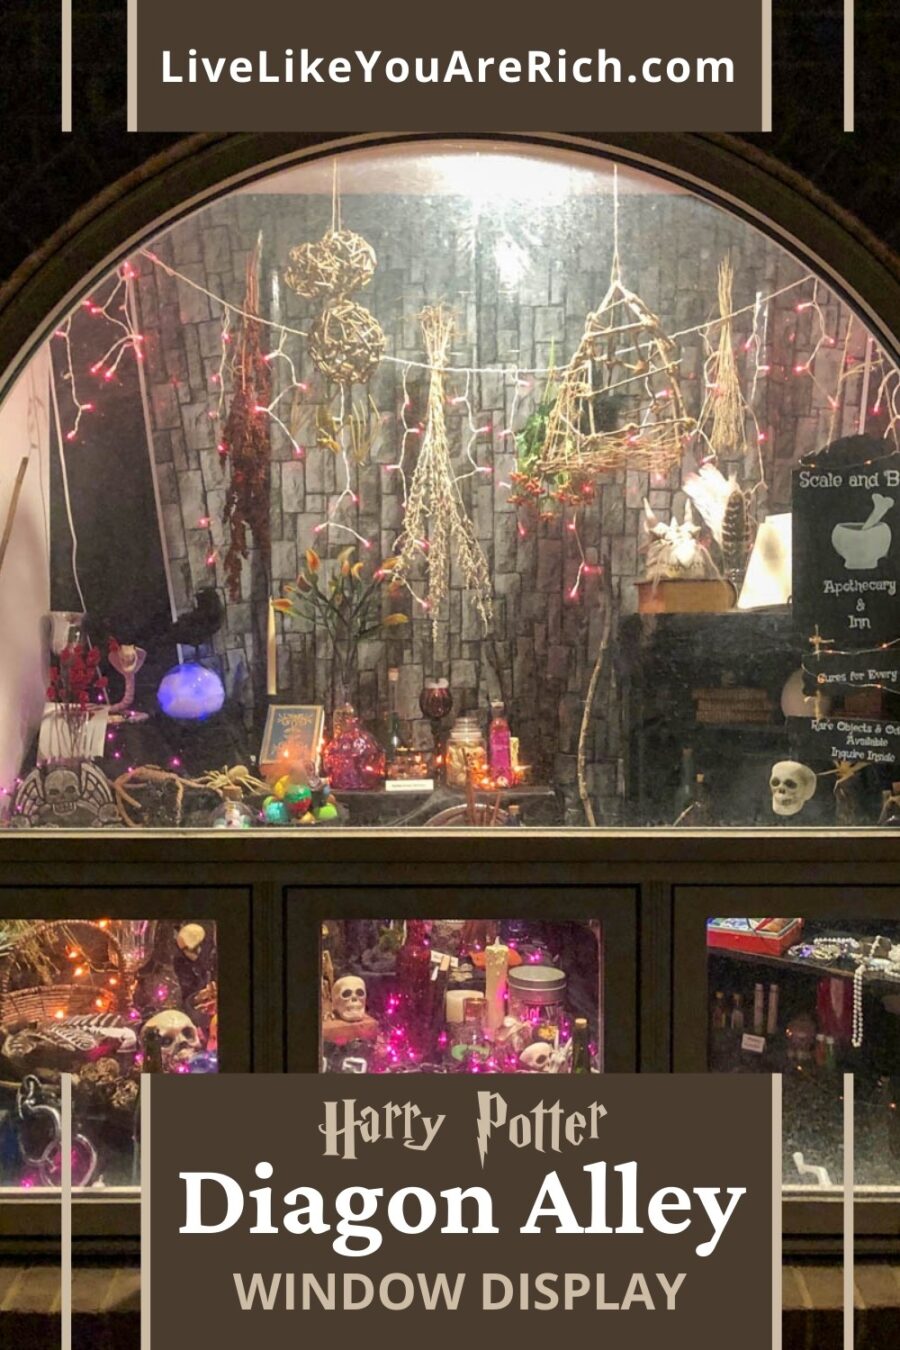 This Diagon Alley Window Display is just amazing. It was expertly put together and is full of fun and spooky details. If you love Harry Potter, you will love Scale and Bone in Diagon Alley shop. #harrypotter #diagonalley